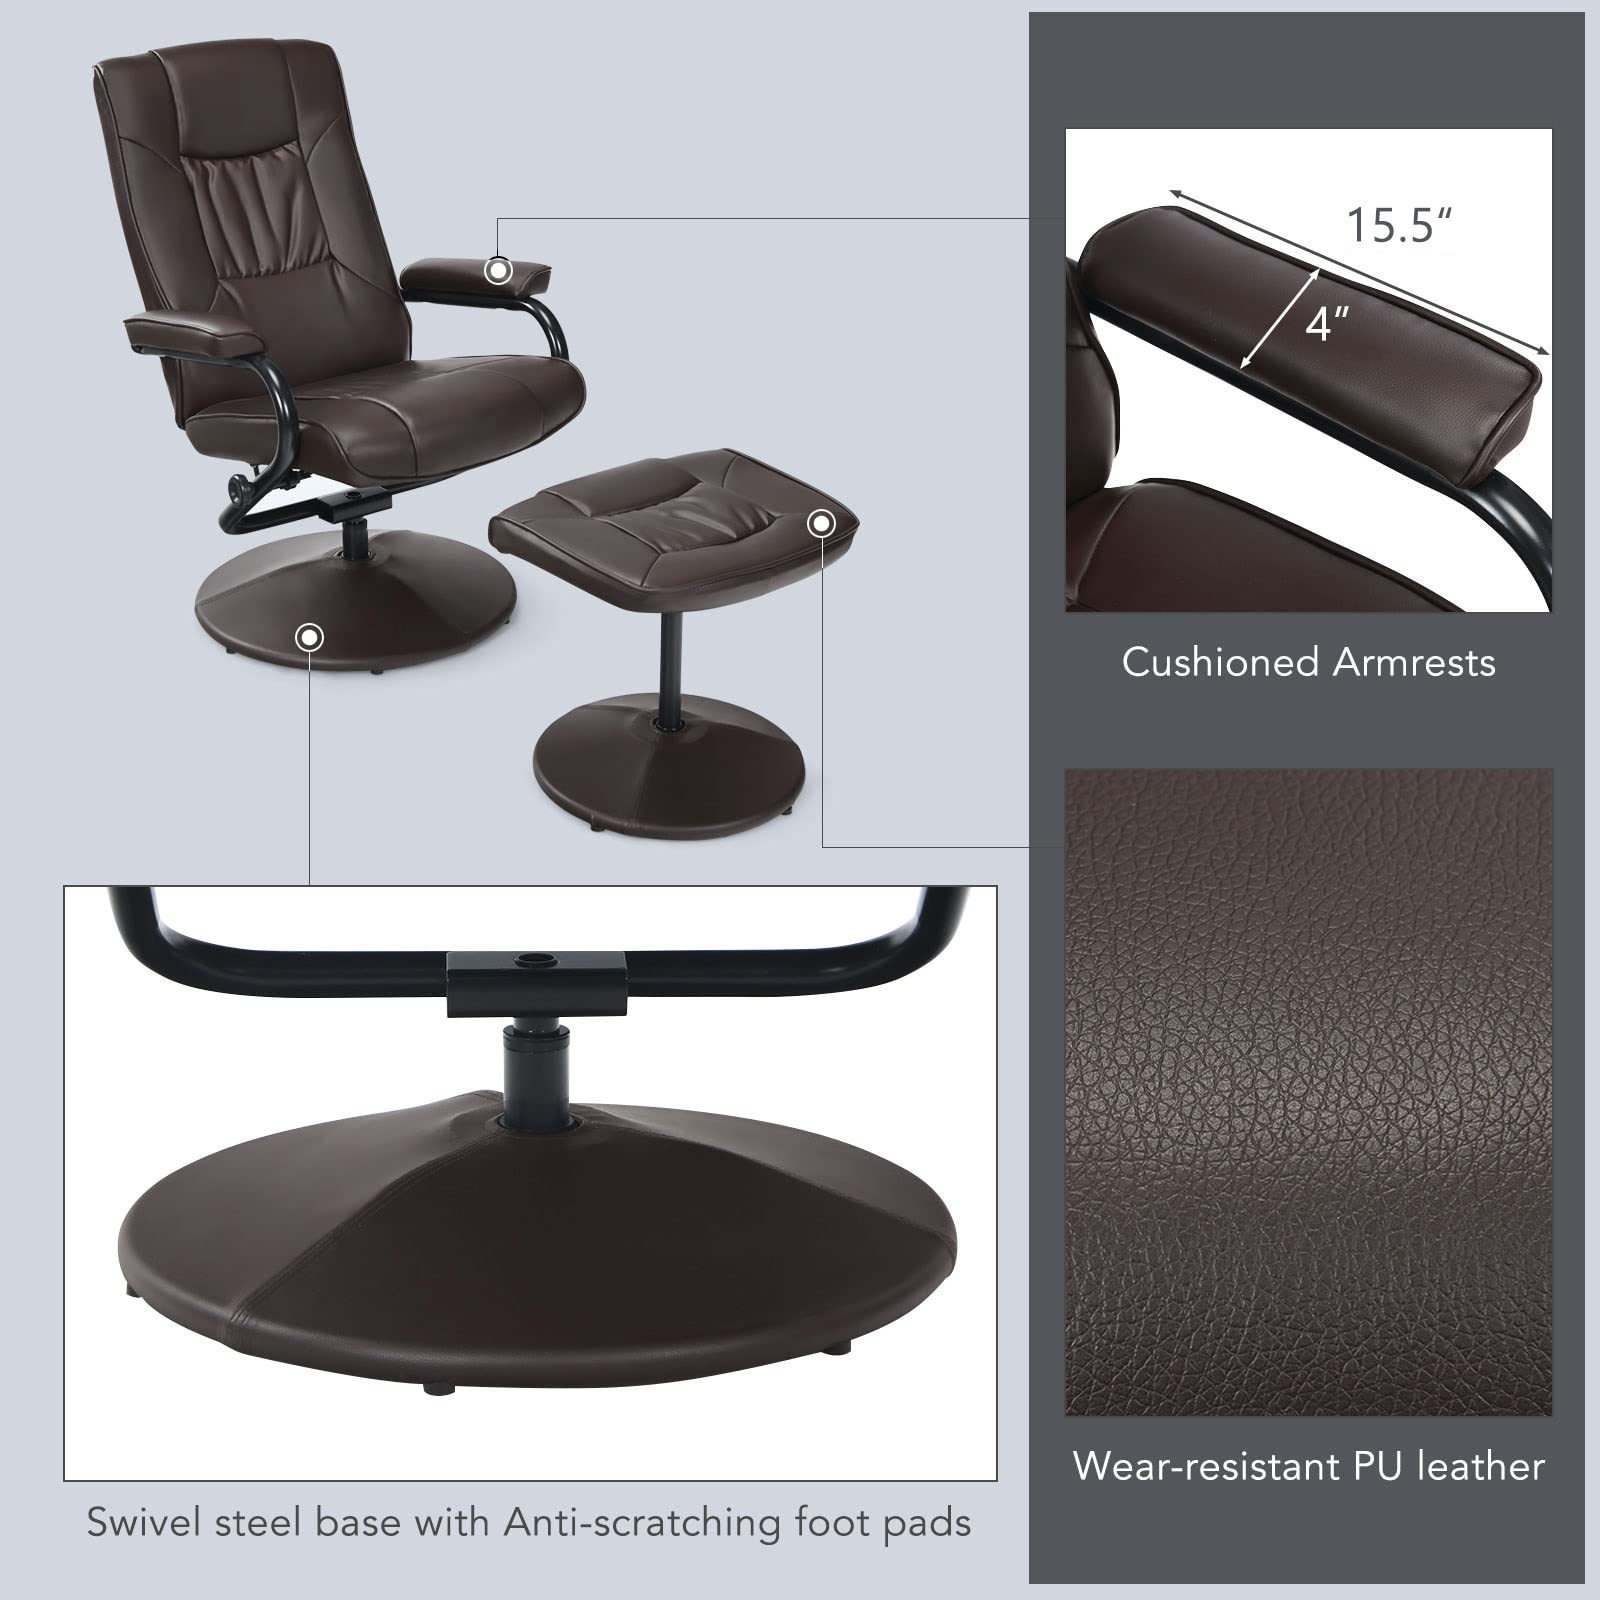 Giantex Recliner Chair with Ottoman, 360 Degree Swivel Leather Reclining Chair with Stable Steel Base